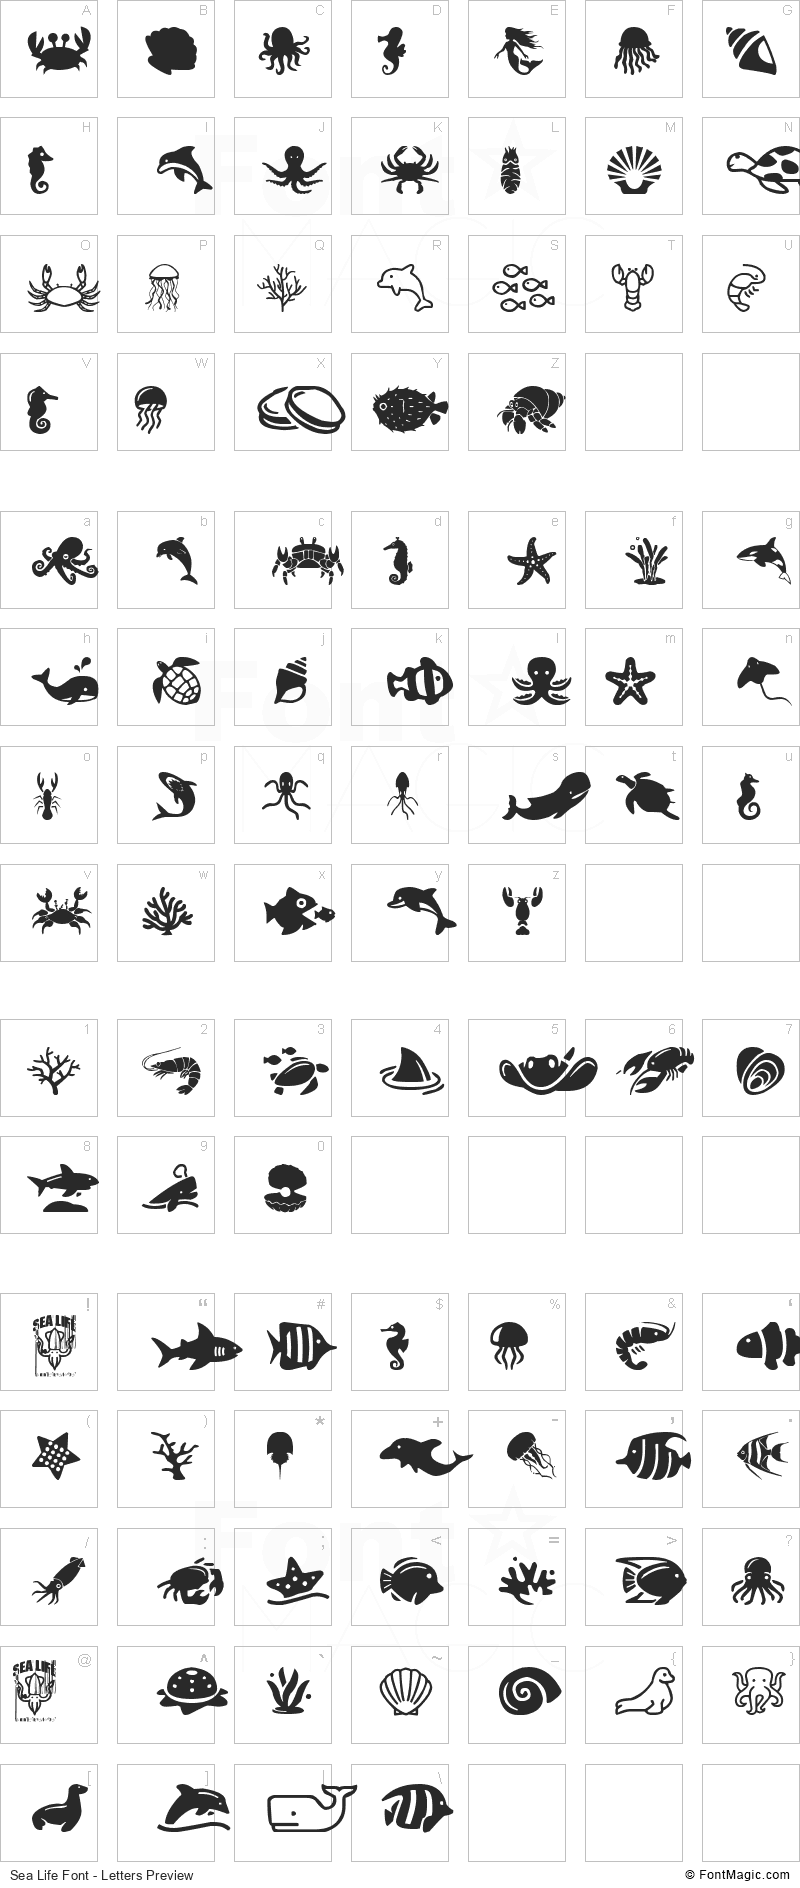 Sea Life Font - All Latters Preview Chart